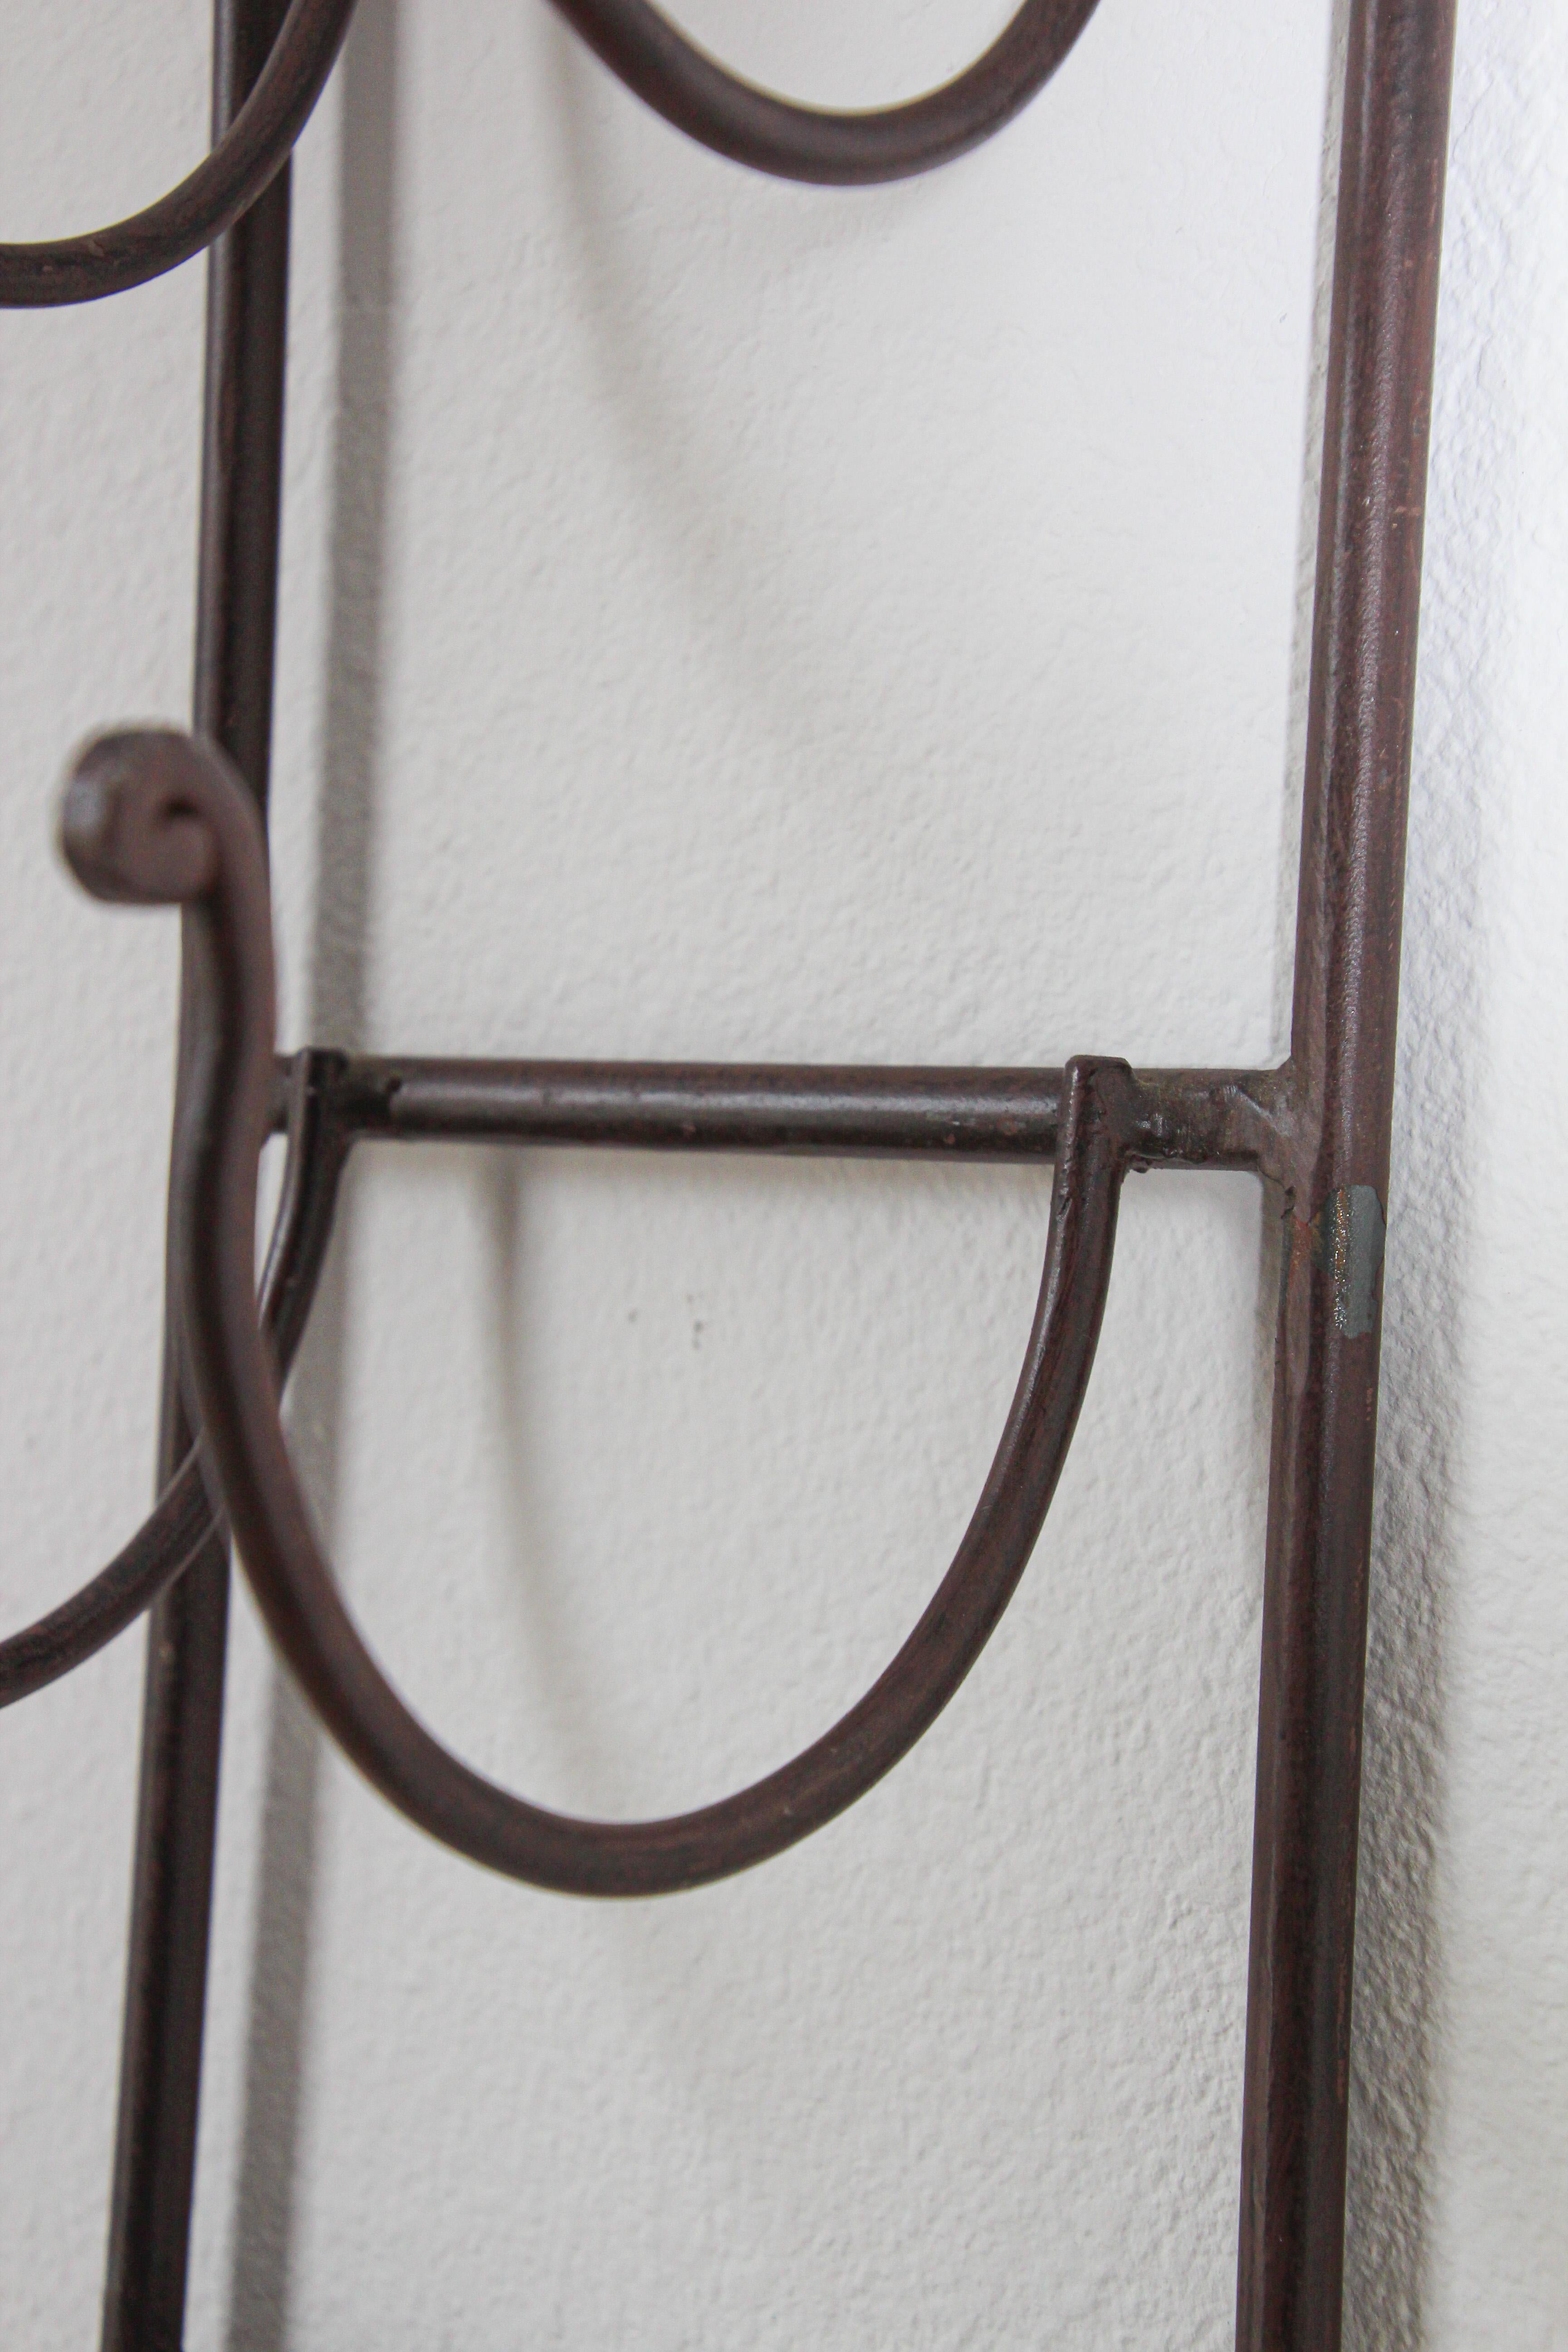 Hand-Crafted Wrought Iron Hand Forged Vintage Bathroom Towel Holder